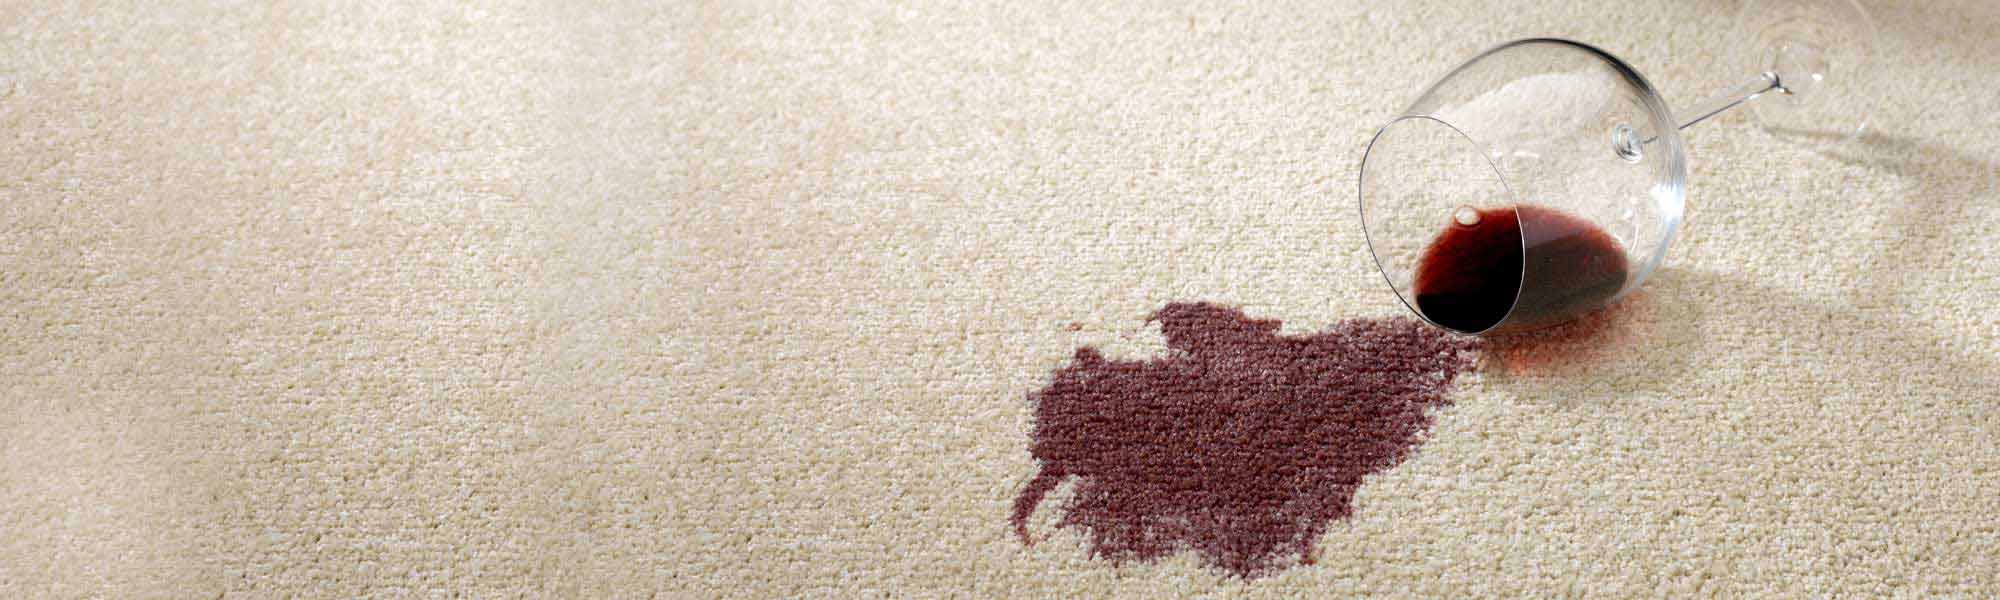 Professional Stain Removal Service by Chem-Dry